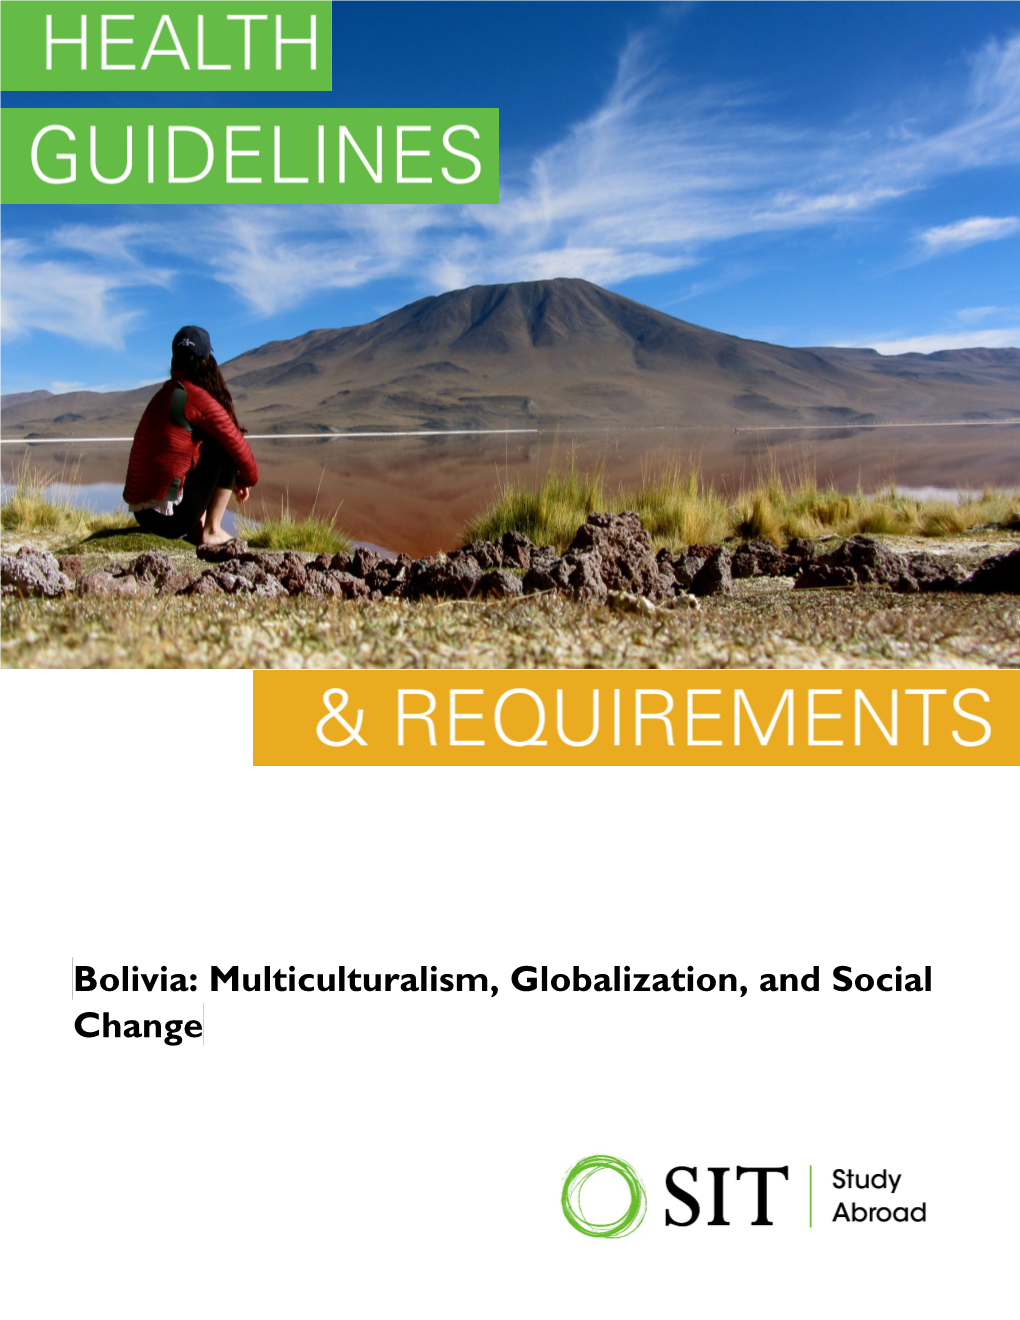 Bolivia: Multiculturalism, Globalization, and Social Change